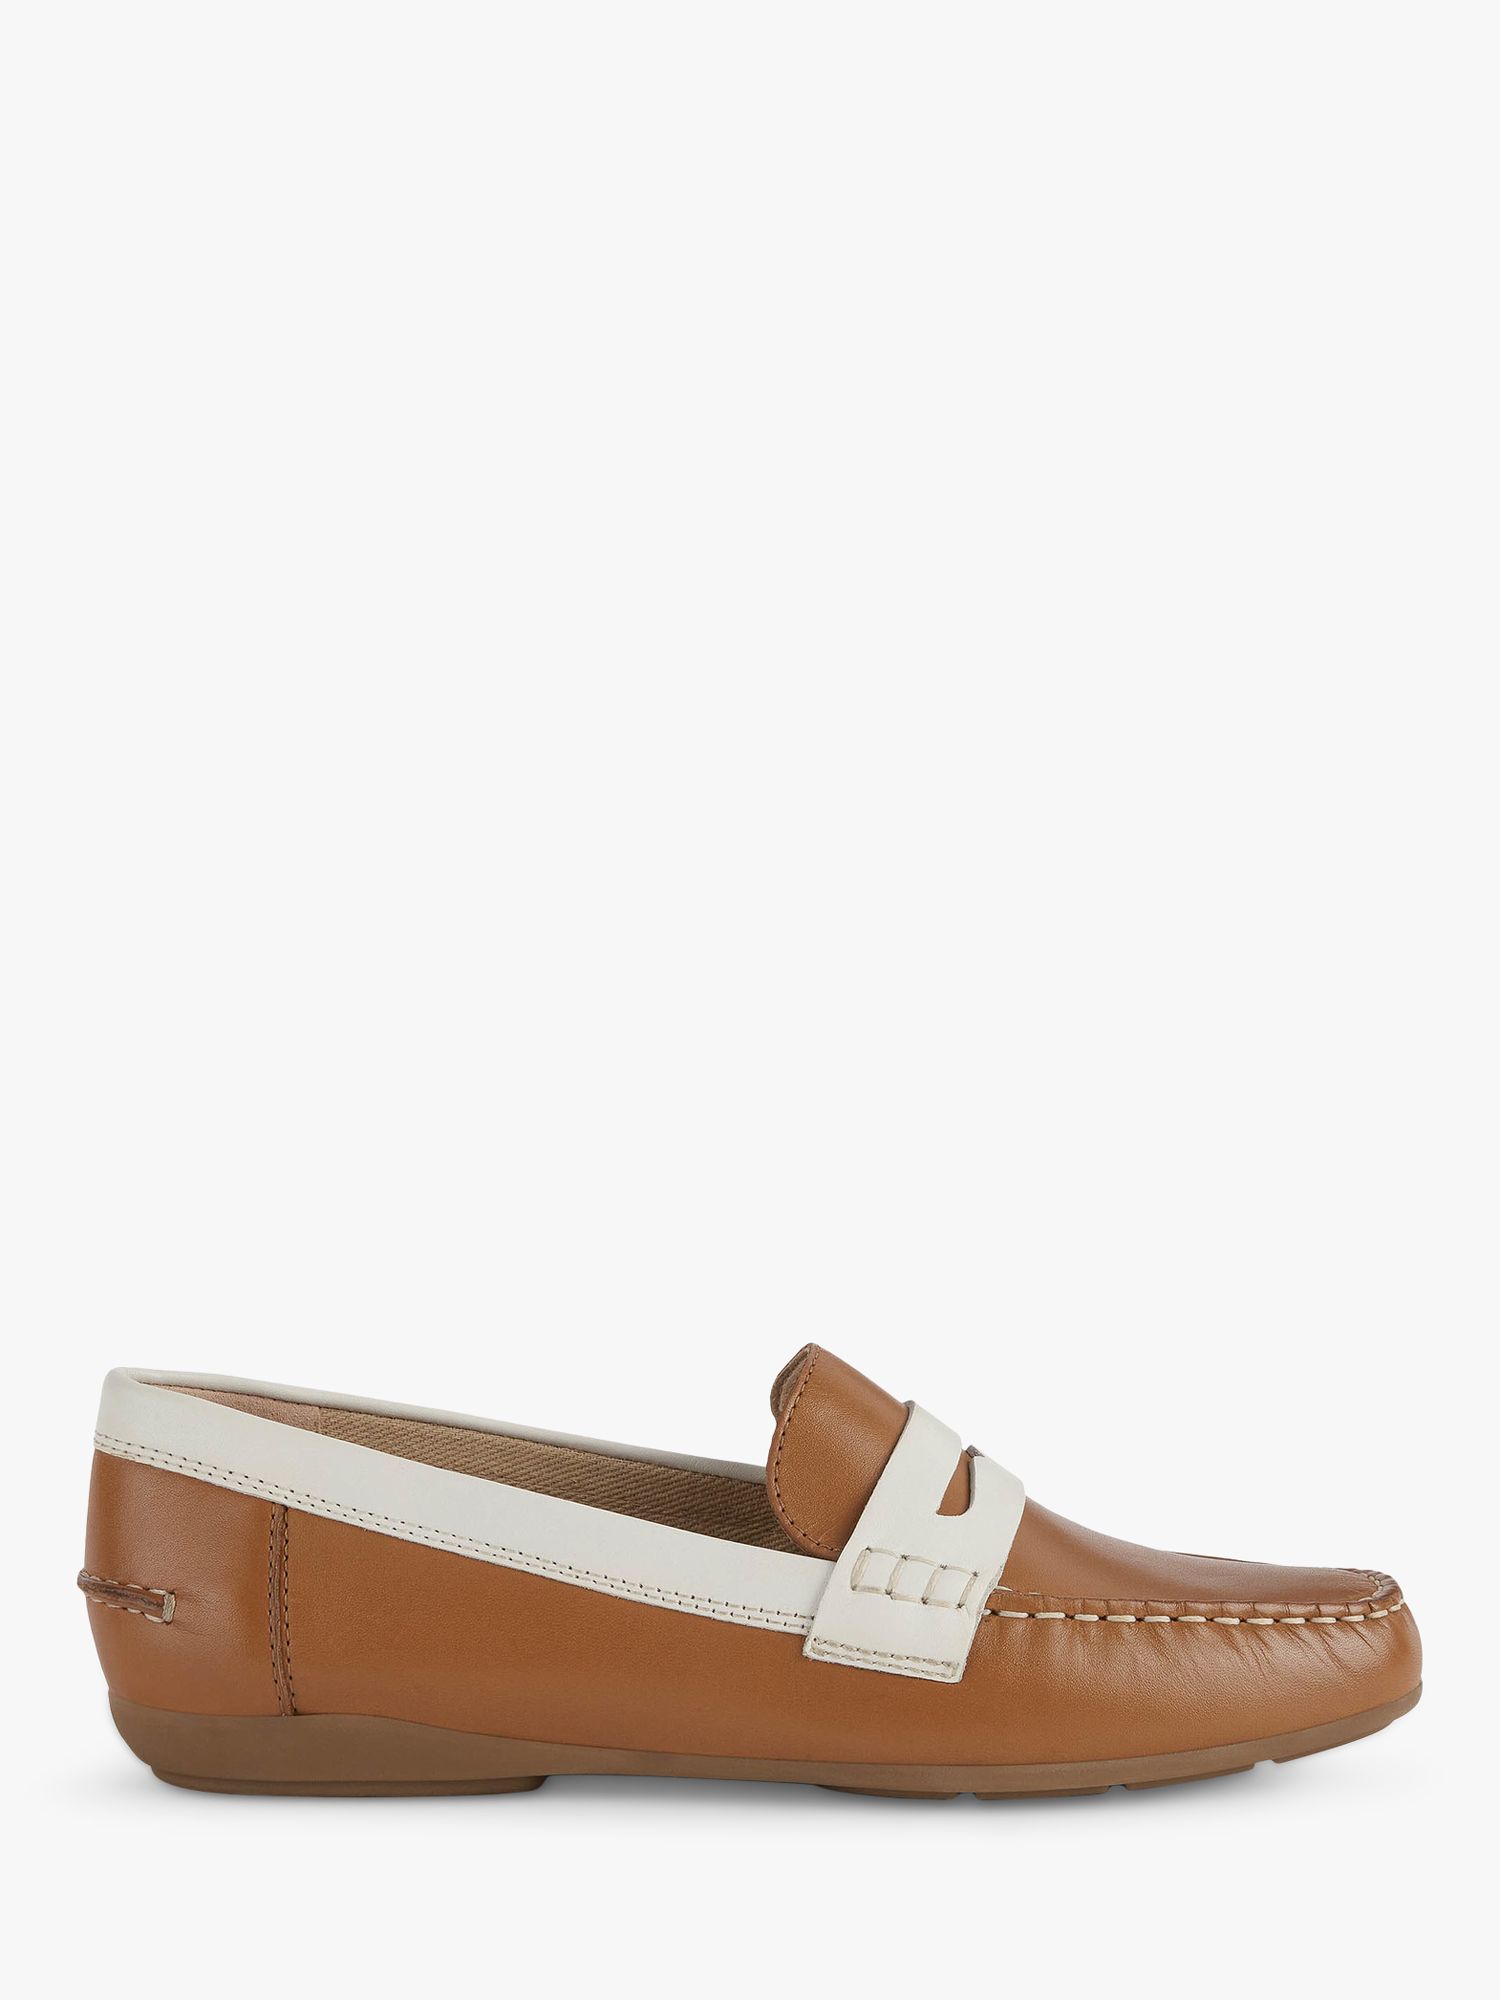 Women's Wide Fit Leather Moccasins, Camel/White at John Lewis & Partners